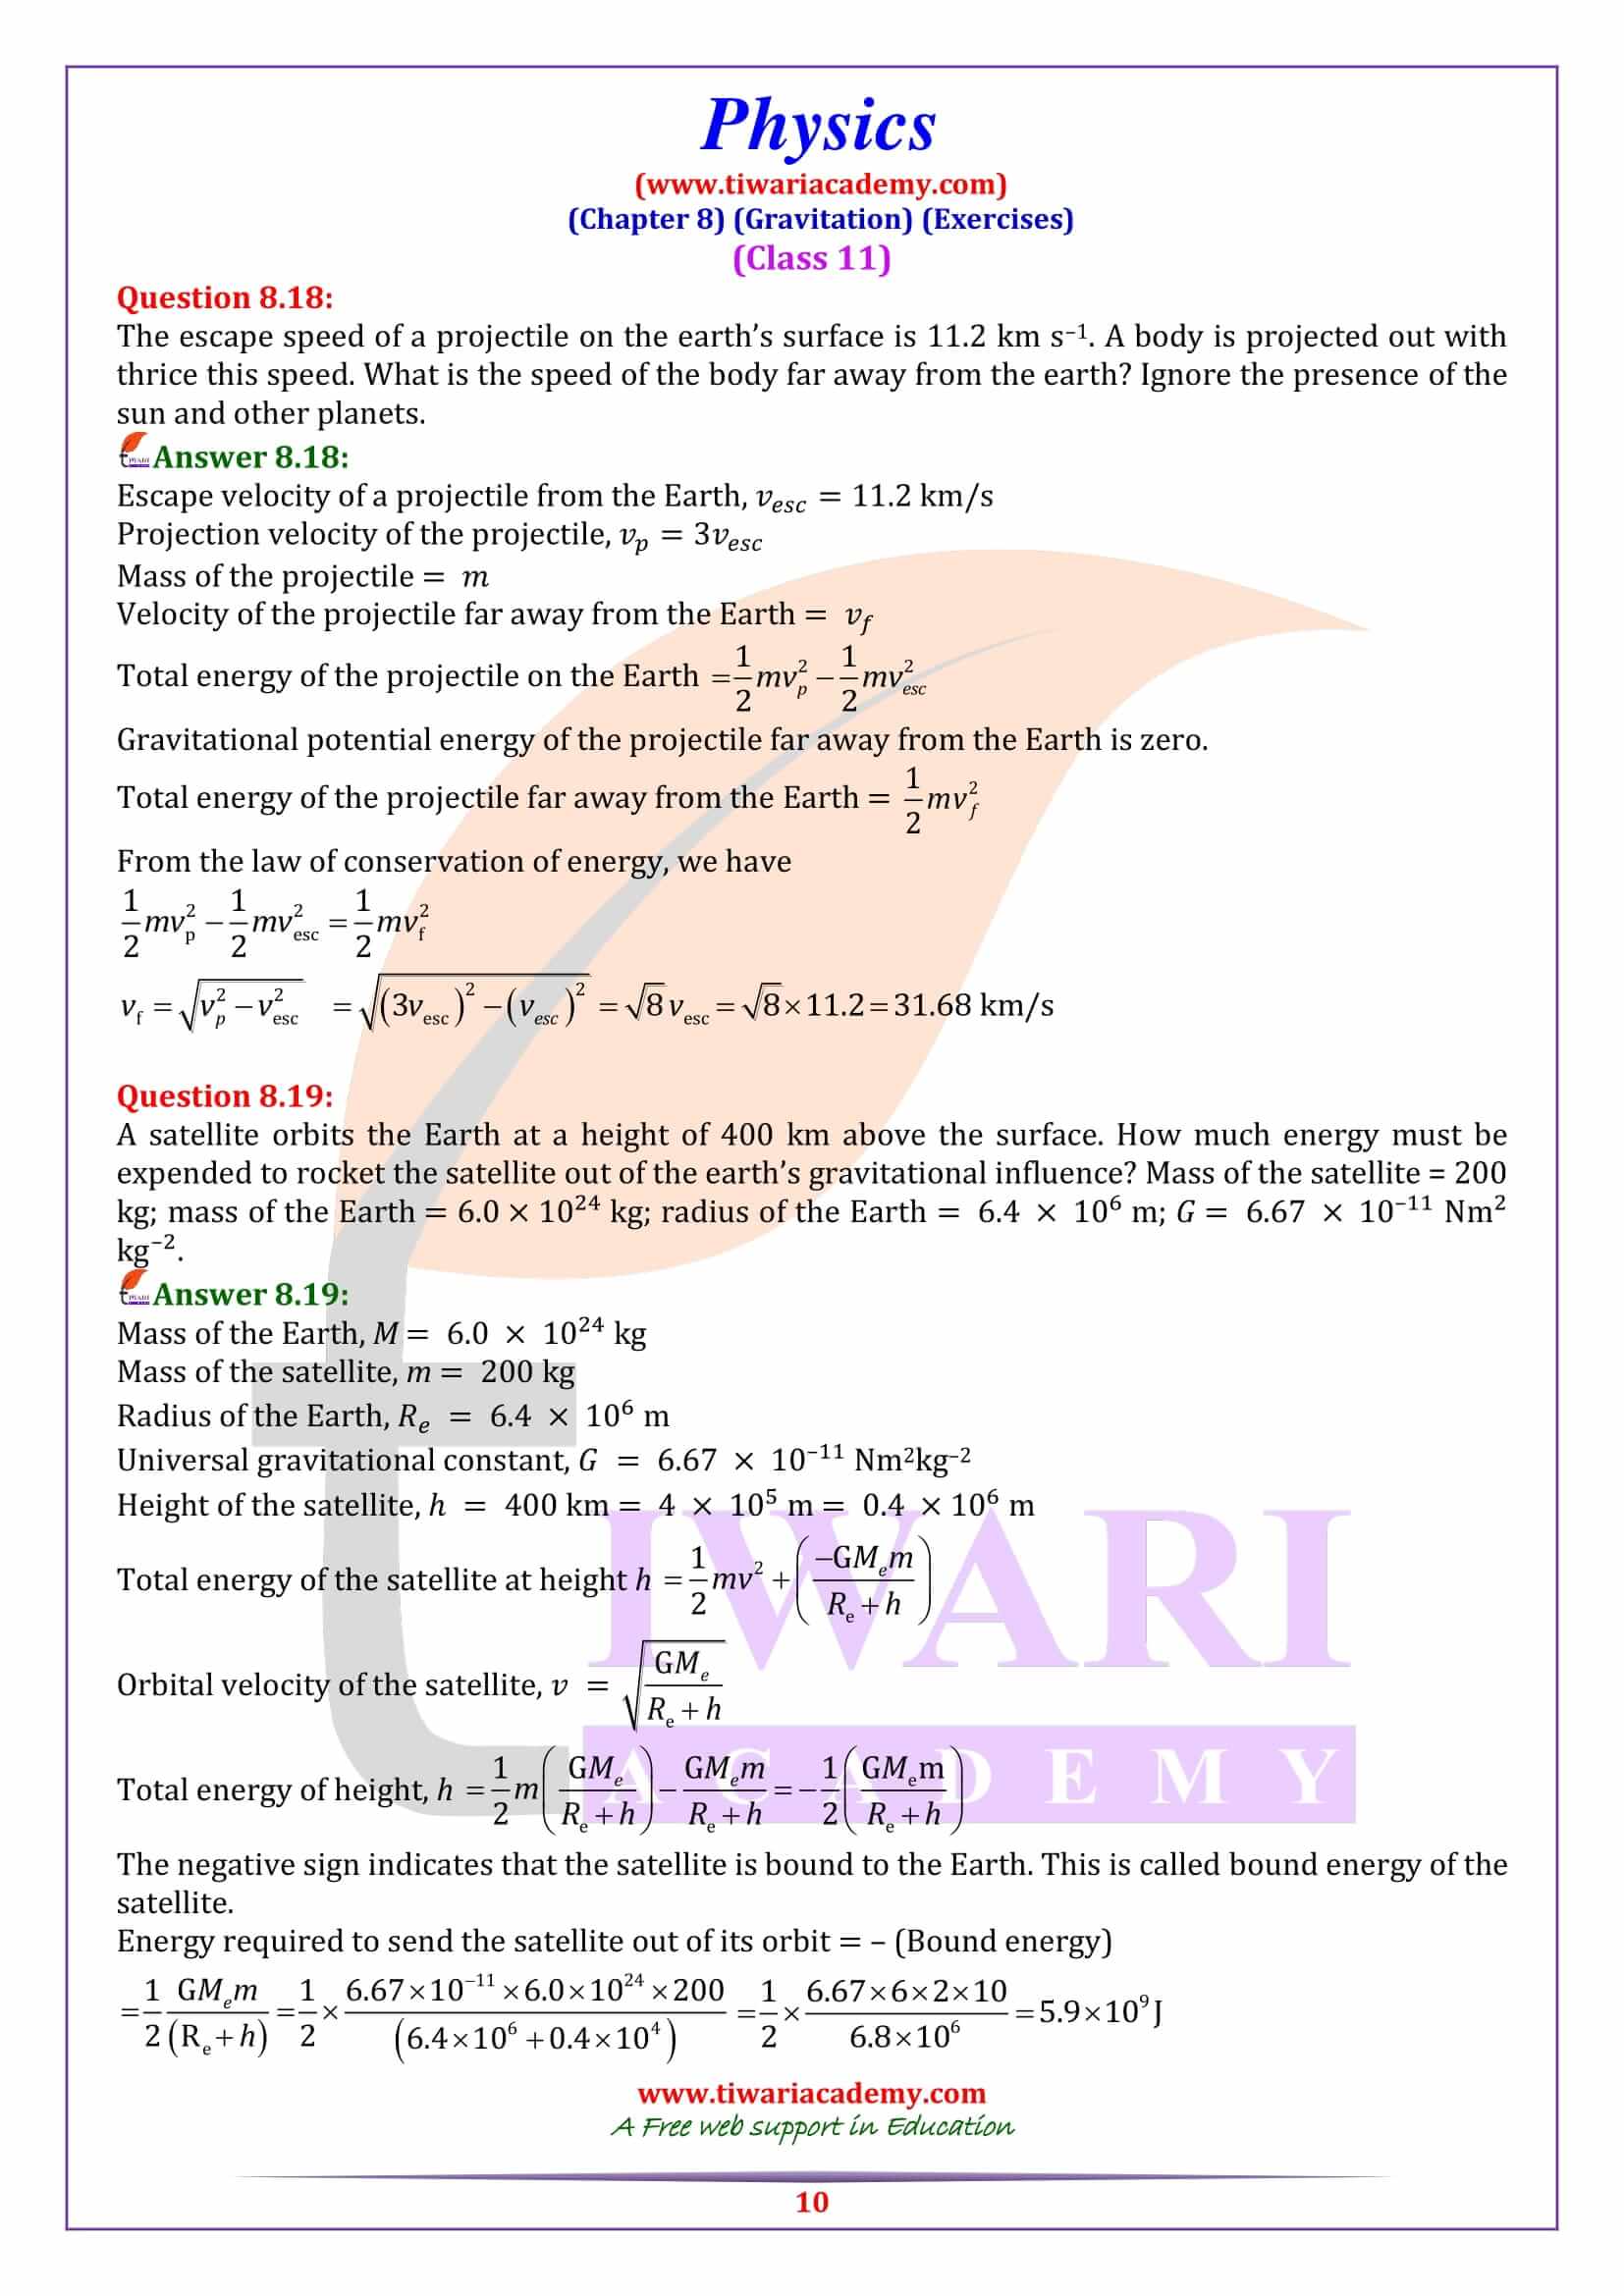 Class 11 Physics Chapter 8 Exercises answers